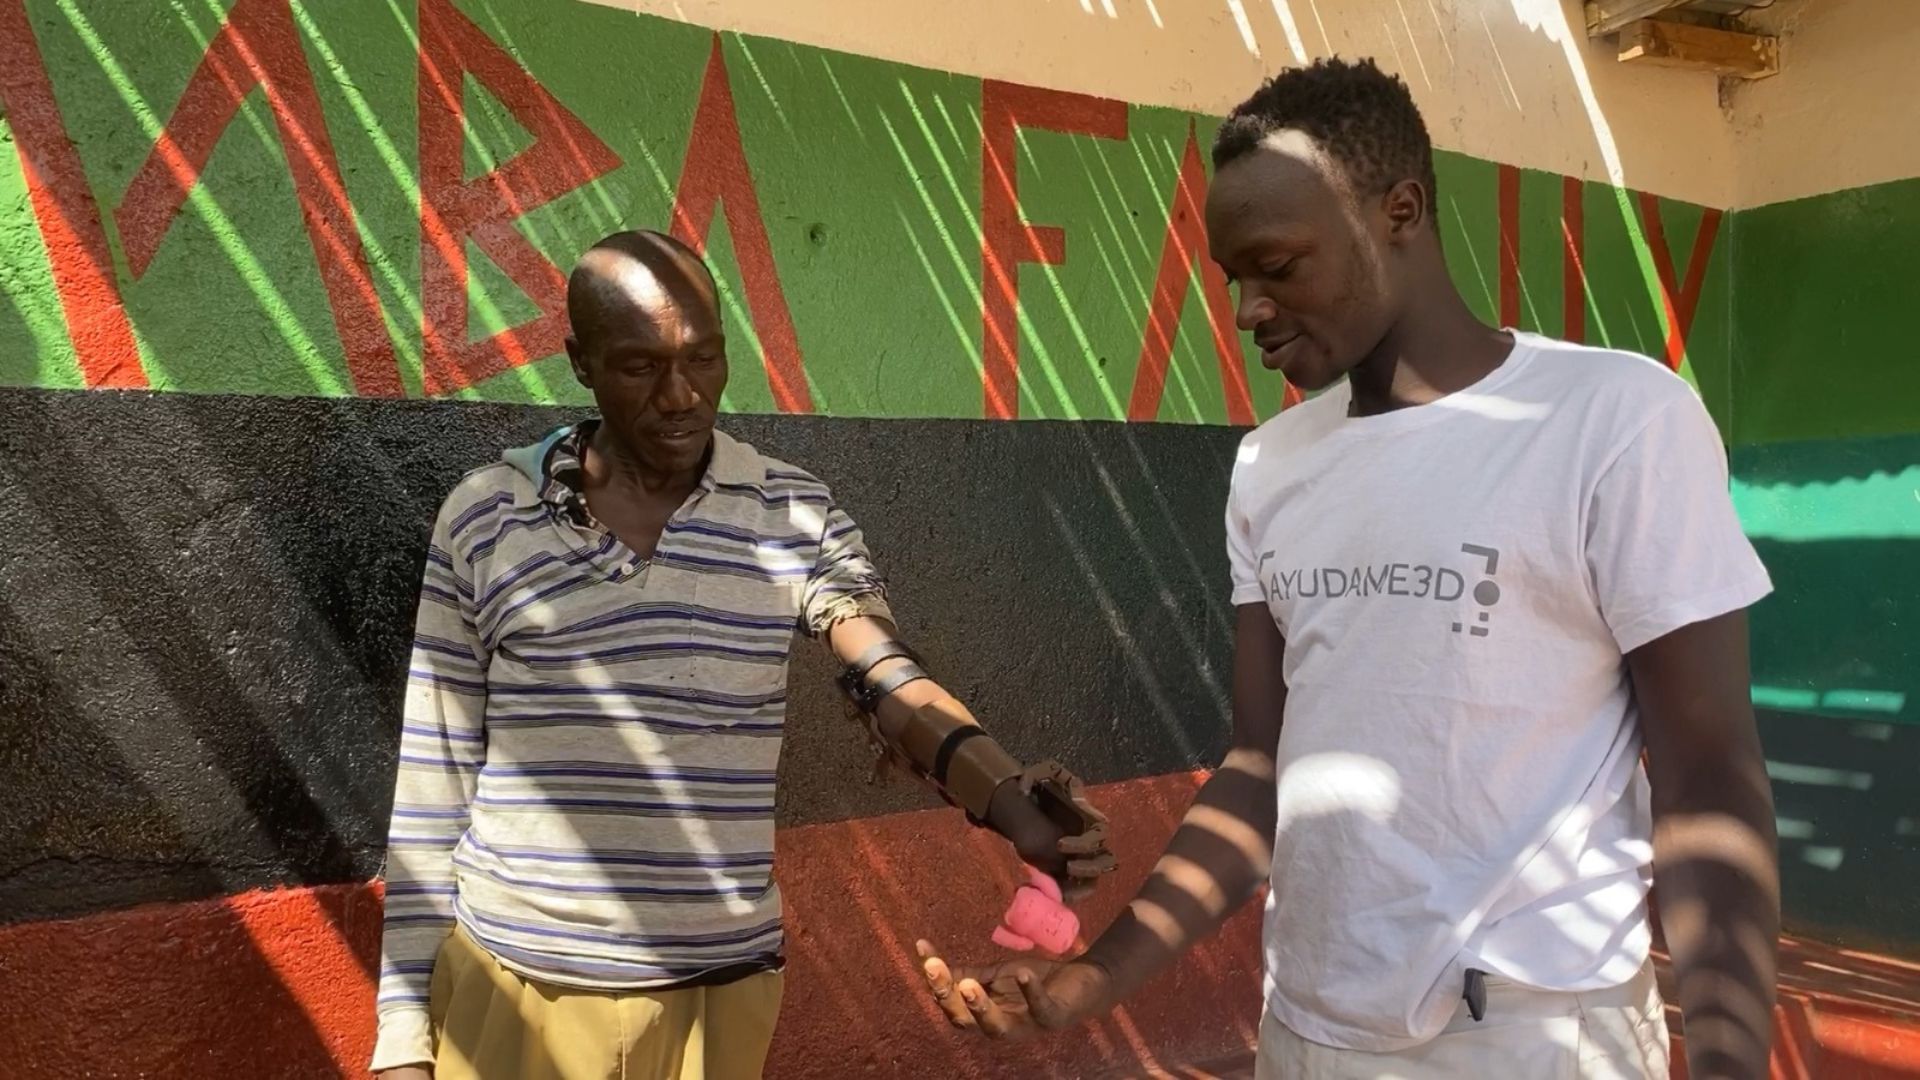 Nelson from Ayudame 3D's Kenyan lab shows a recipient how to open and close the fingers on his new prosthetic arm.  /Handout